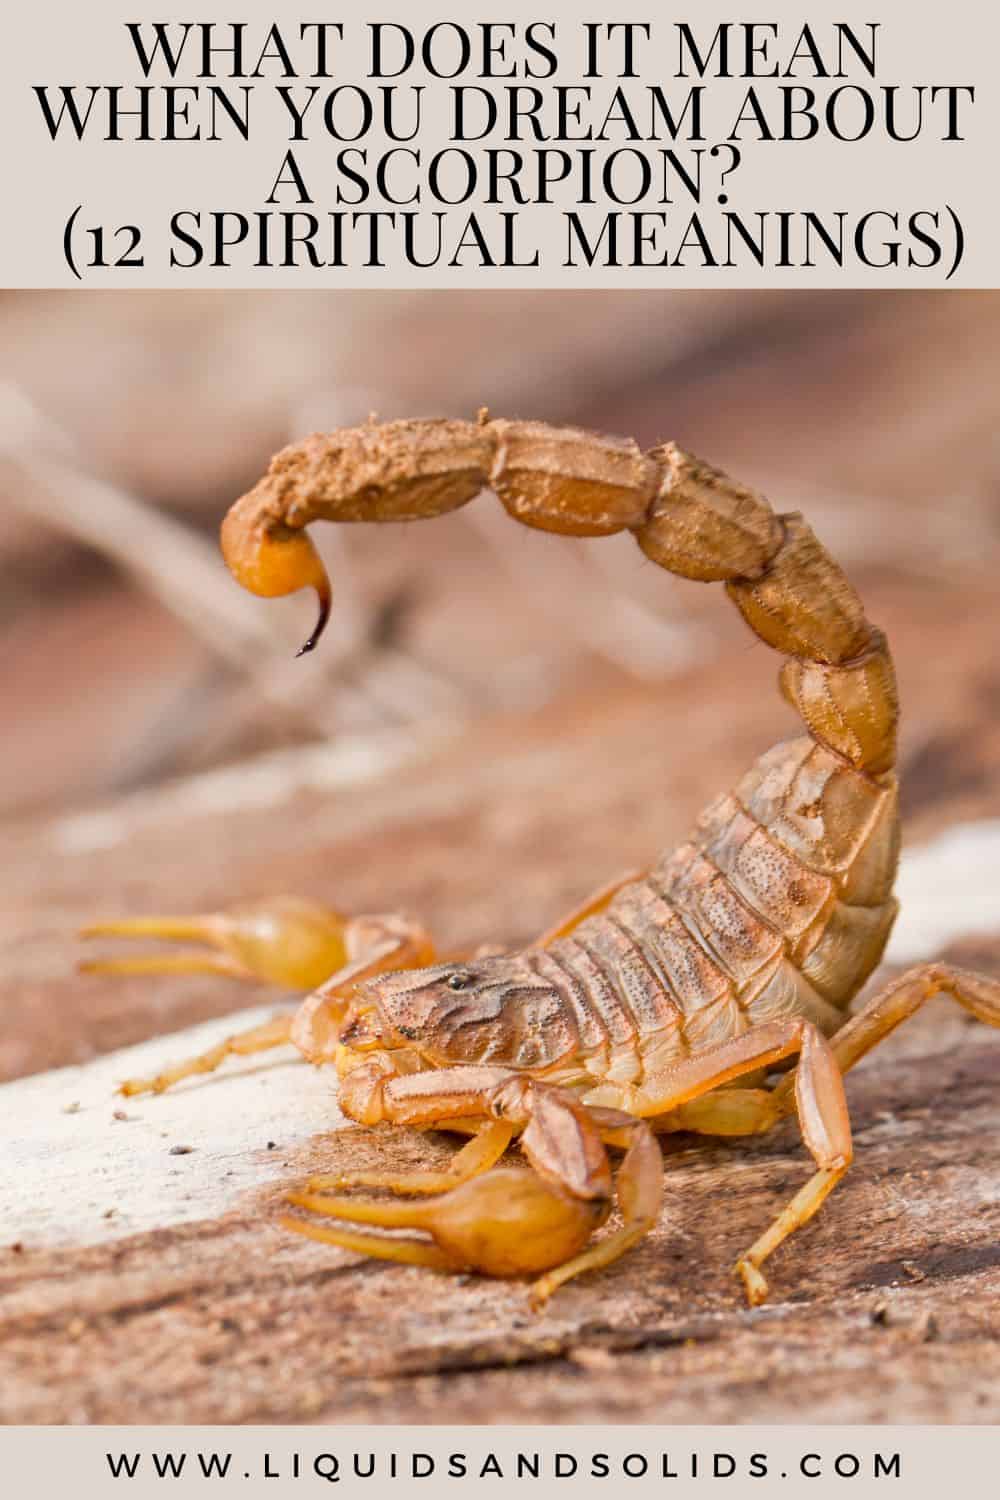 What Does It Mean When You Dream About A Scorpion? (12 Spiritual Meanings)